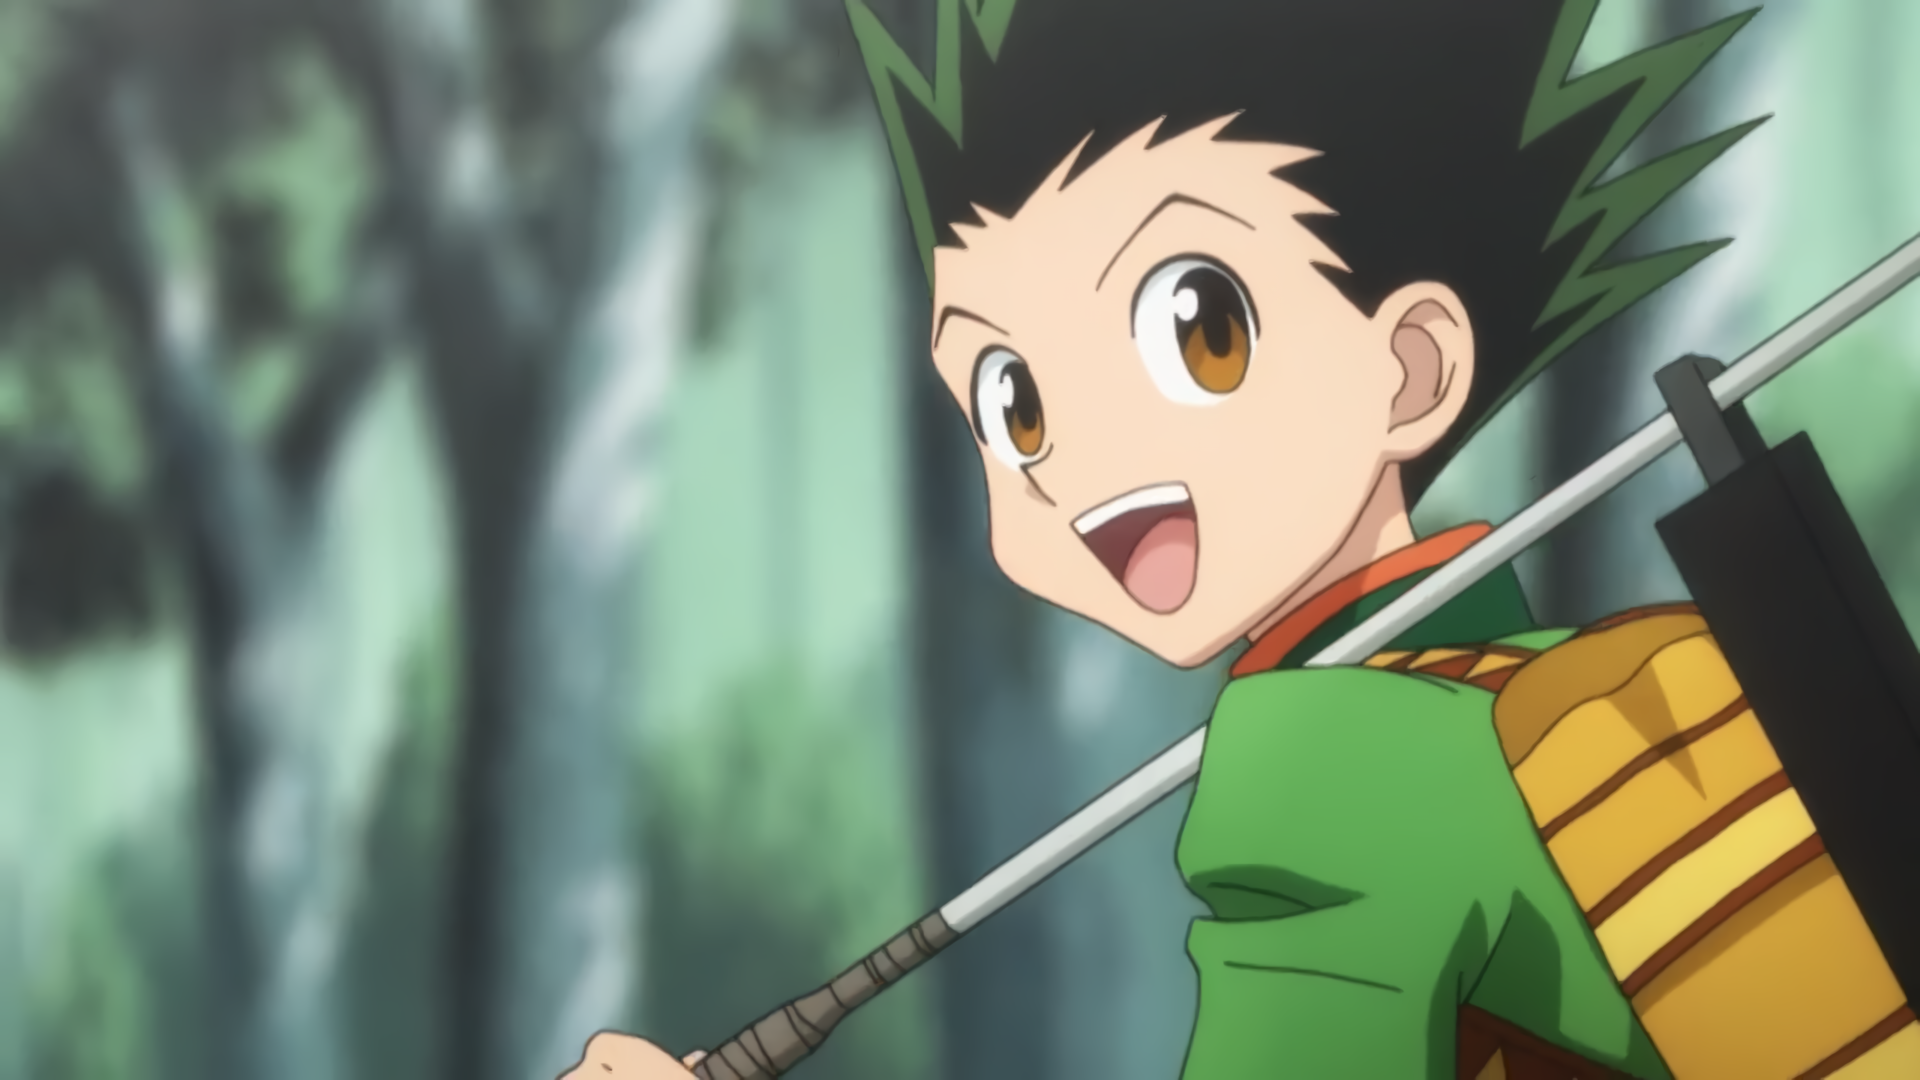 5 Hunter x Hunter characters with unfinished journeys (& 5 whose